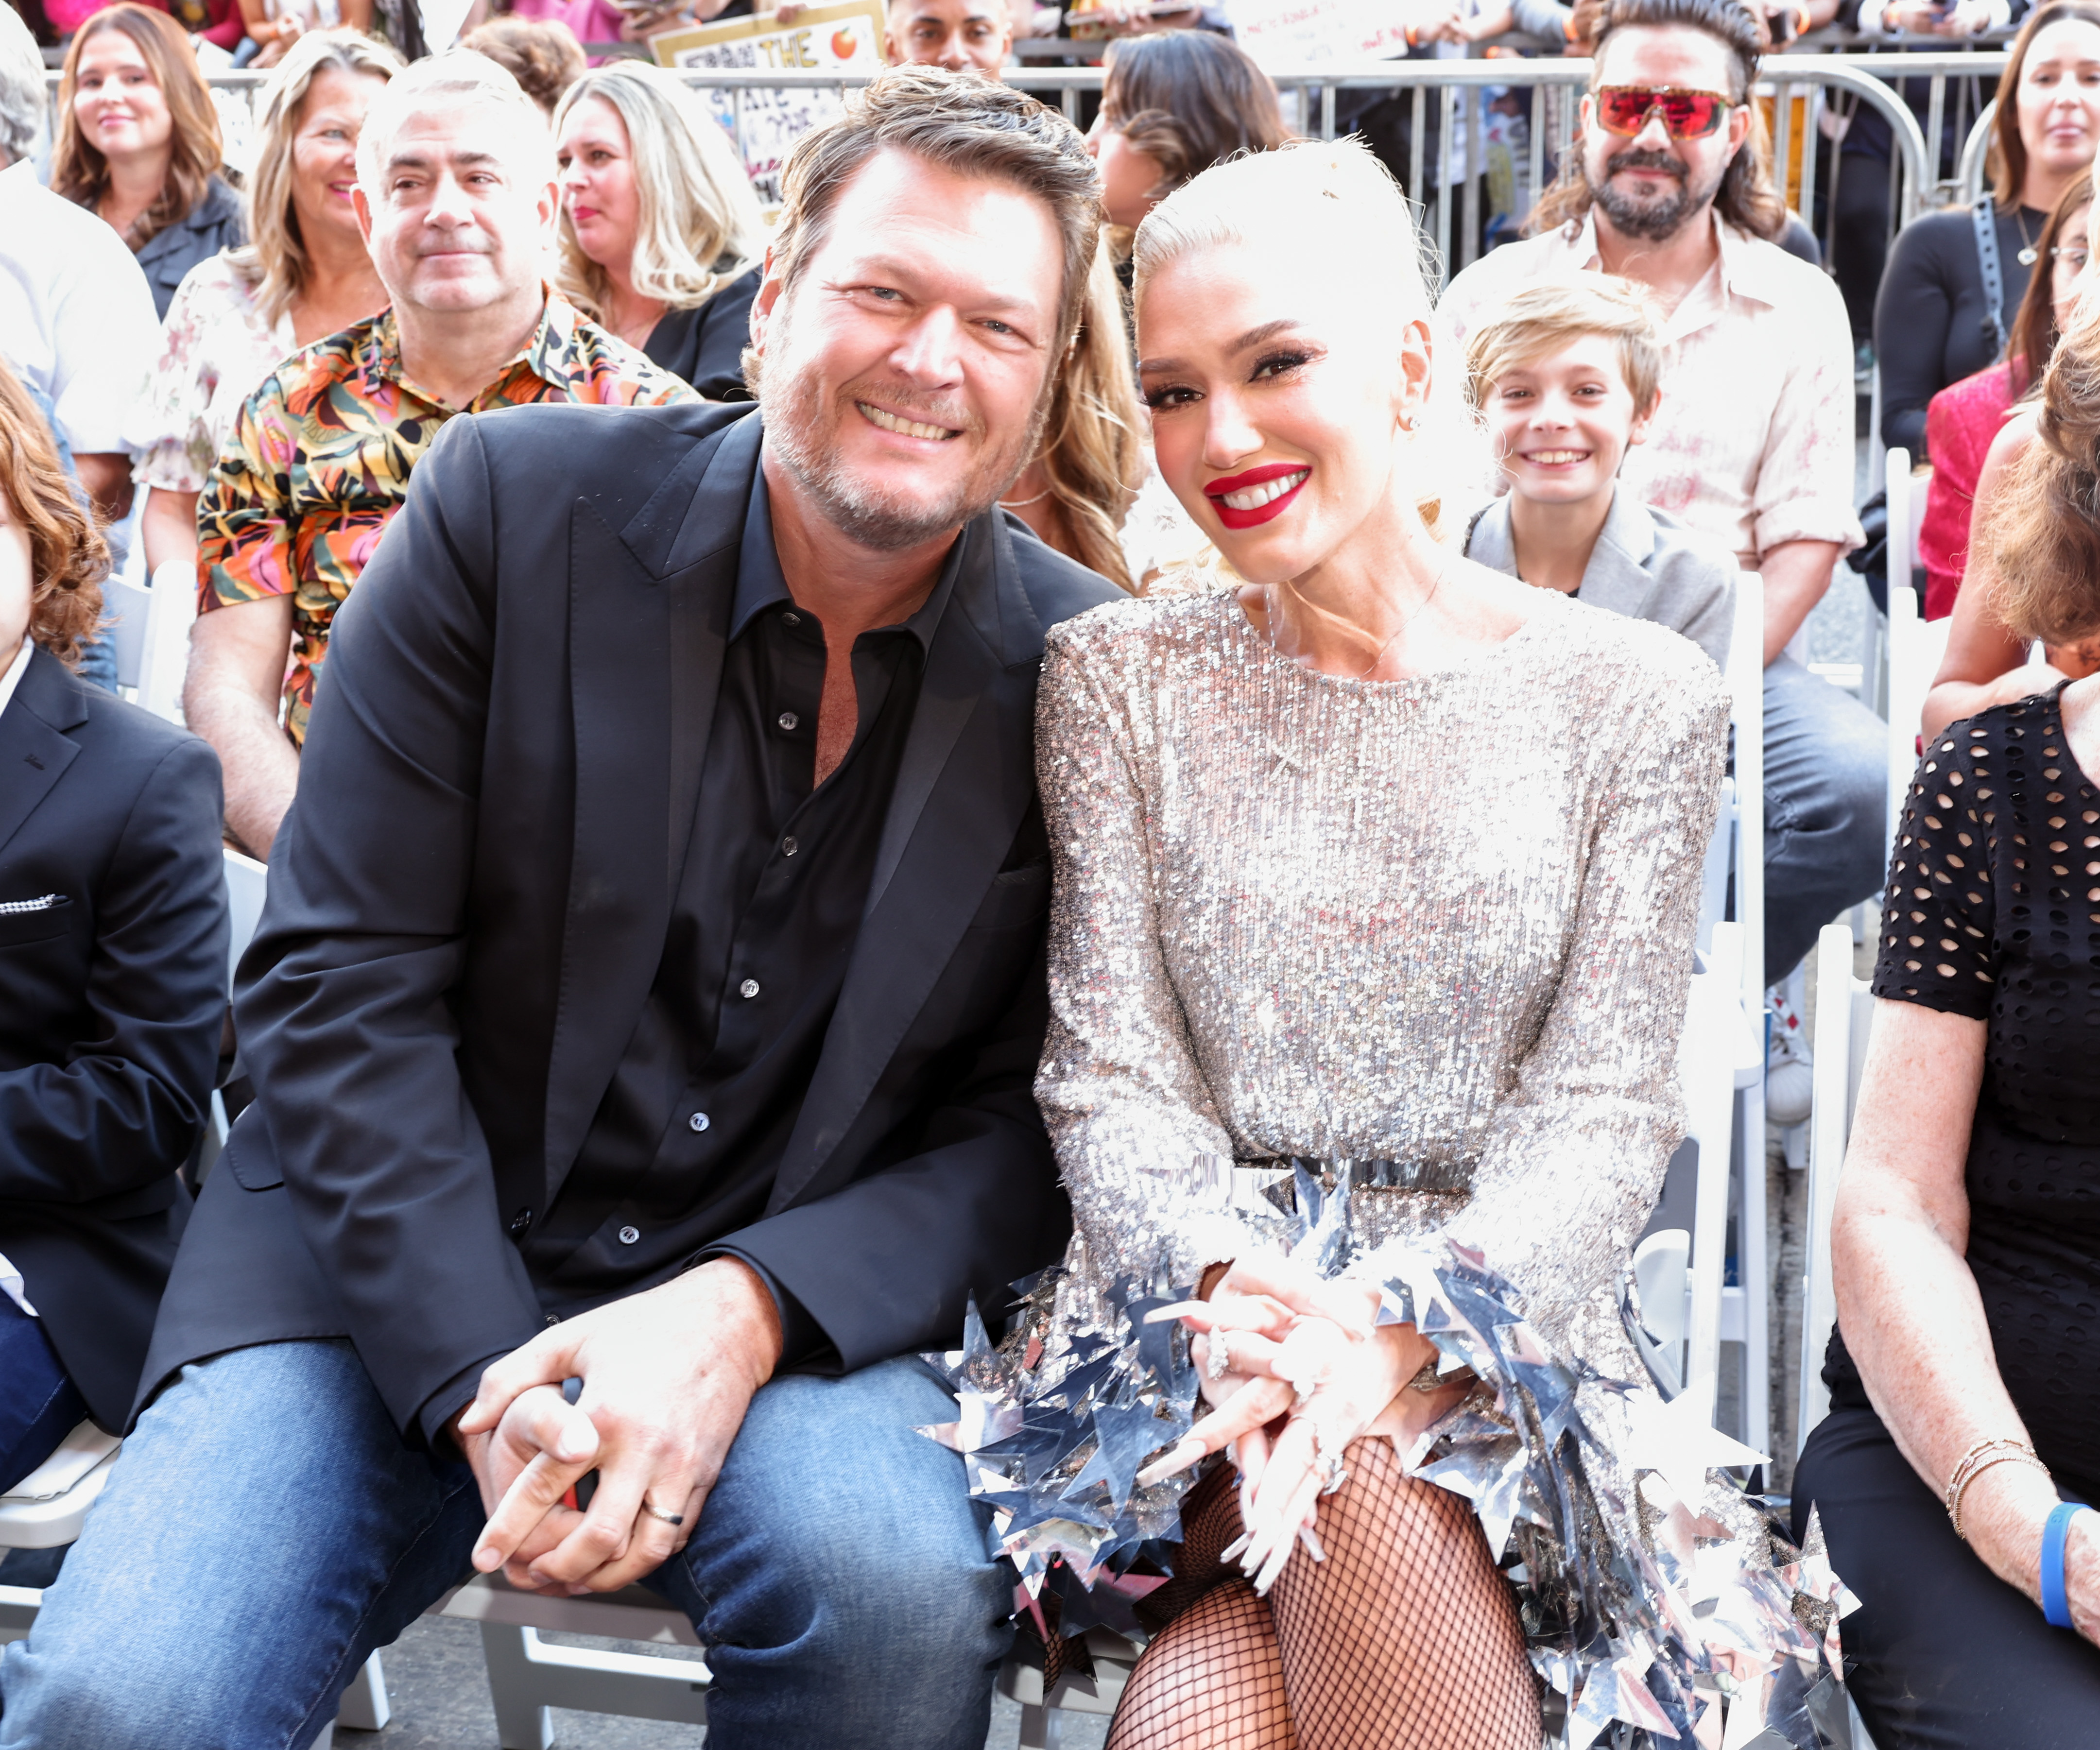 Gwen and husband Blake Shelton continue to counter marriage rumors